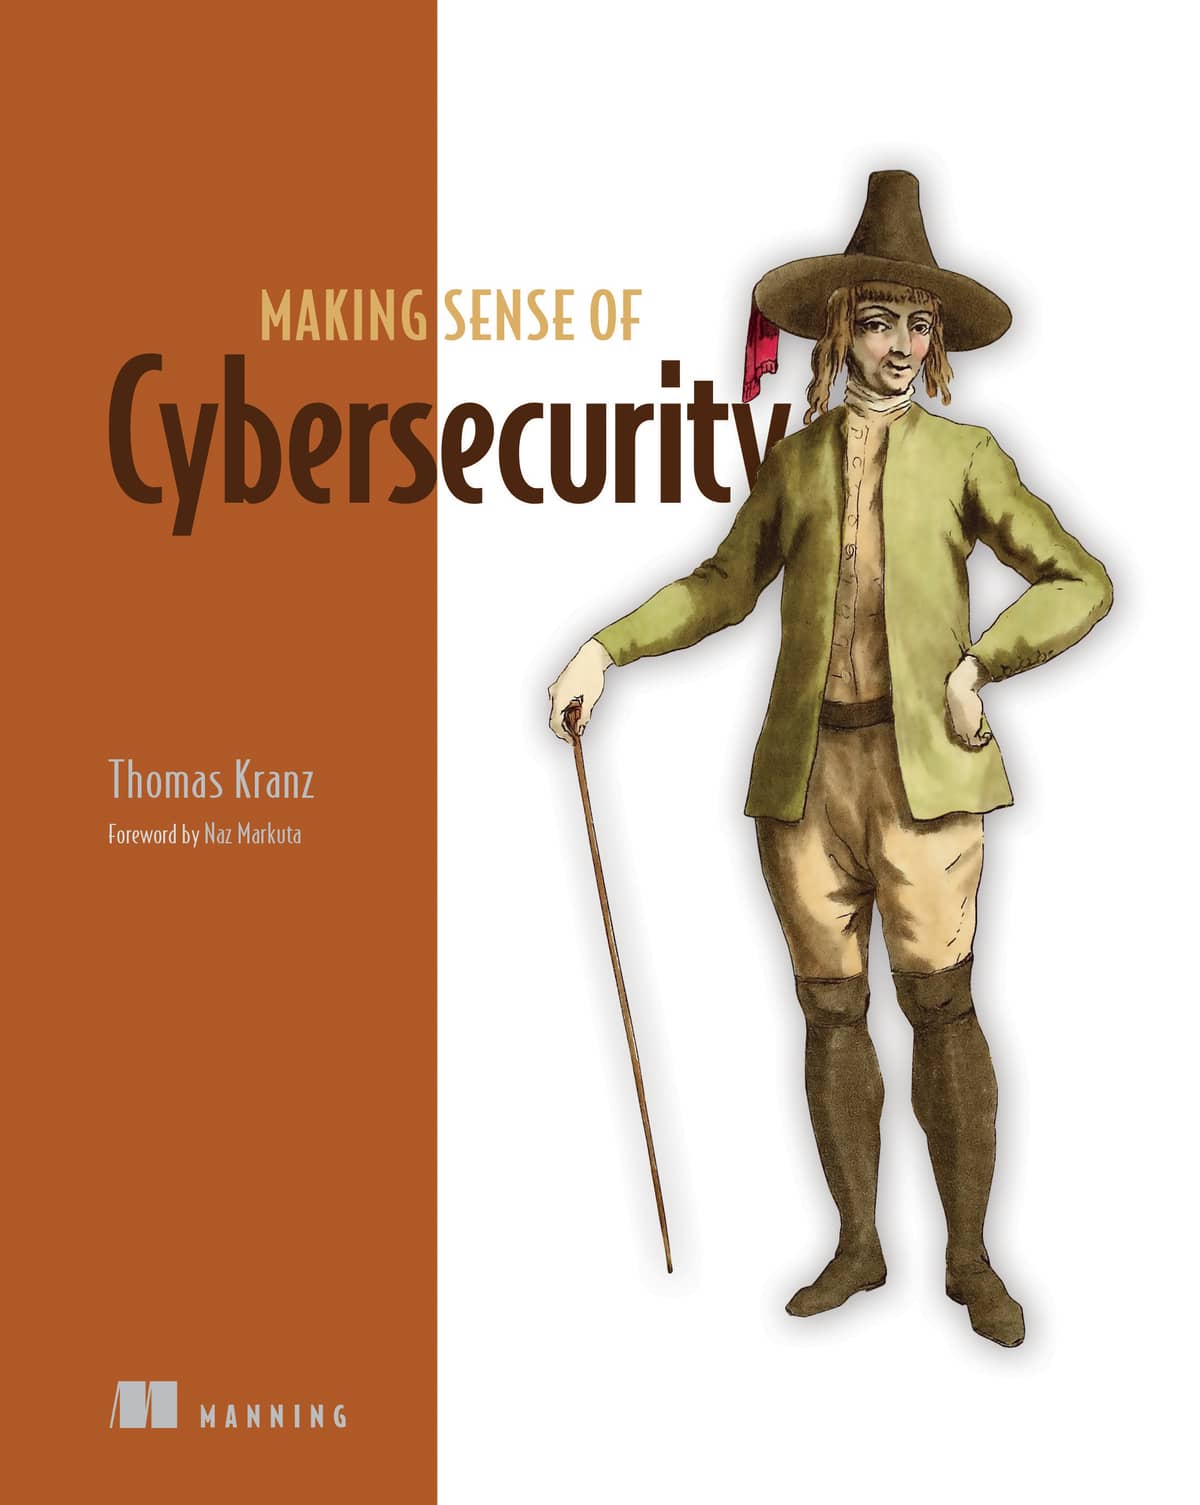 Making Sense of Cybersecurity (Manning)